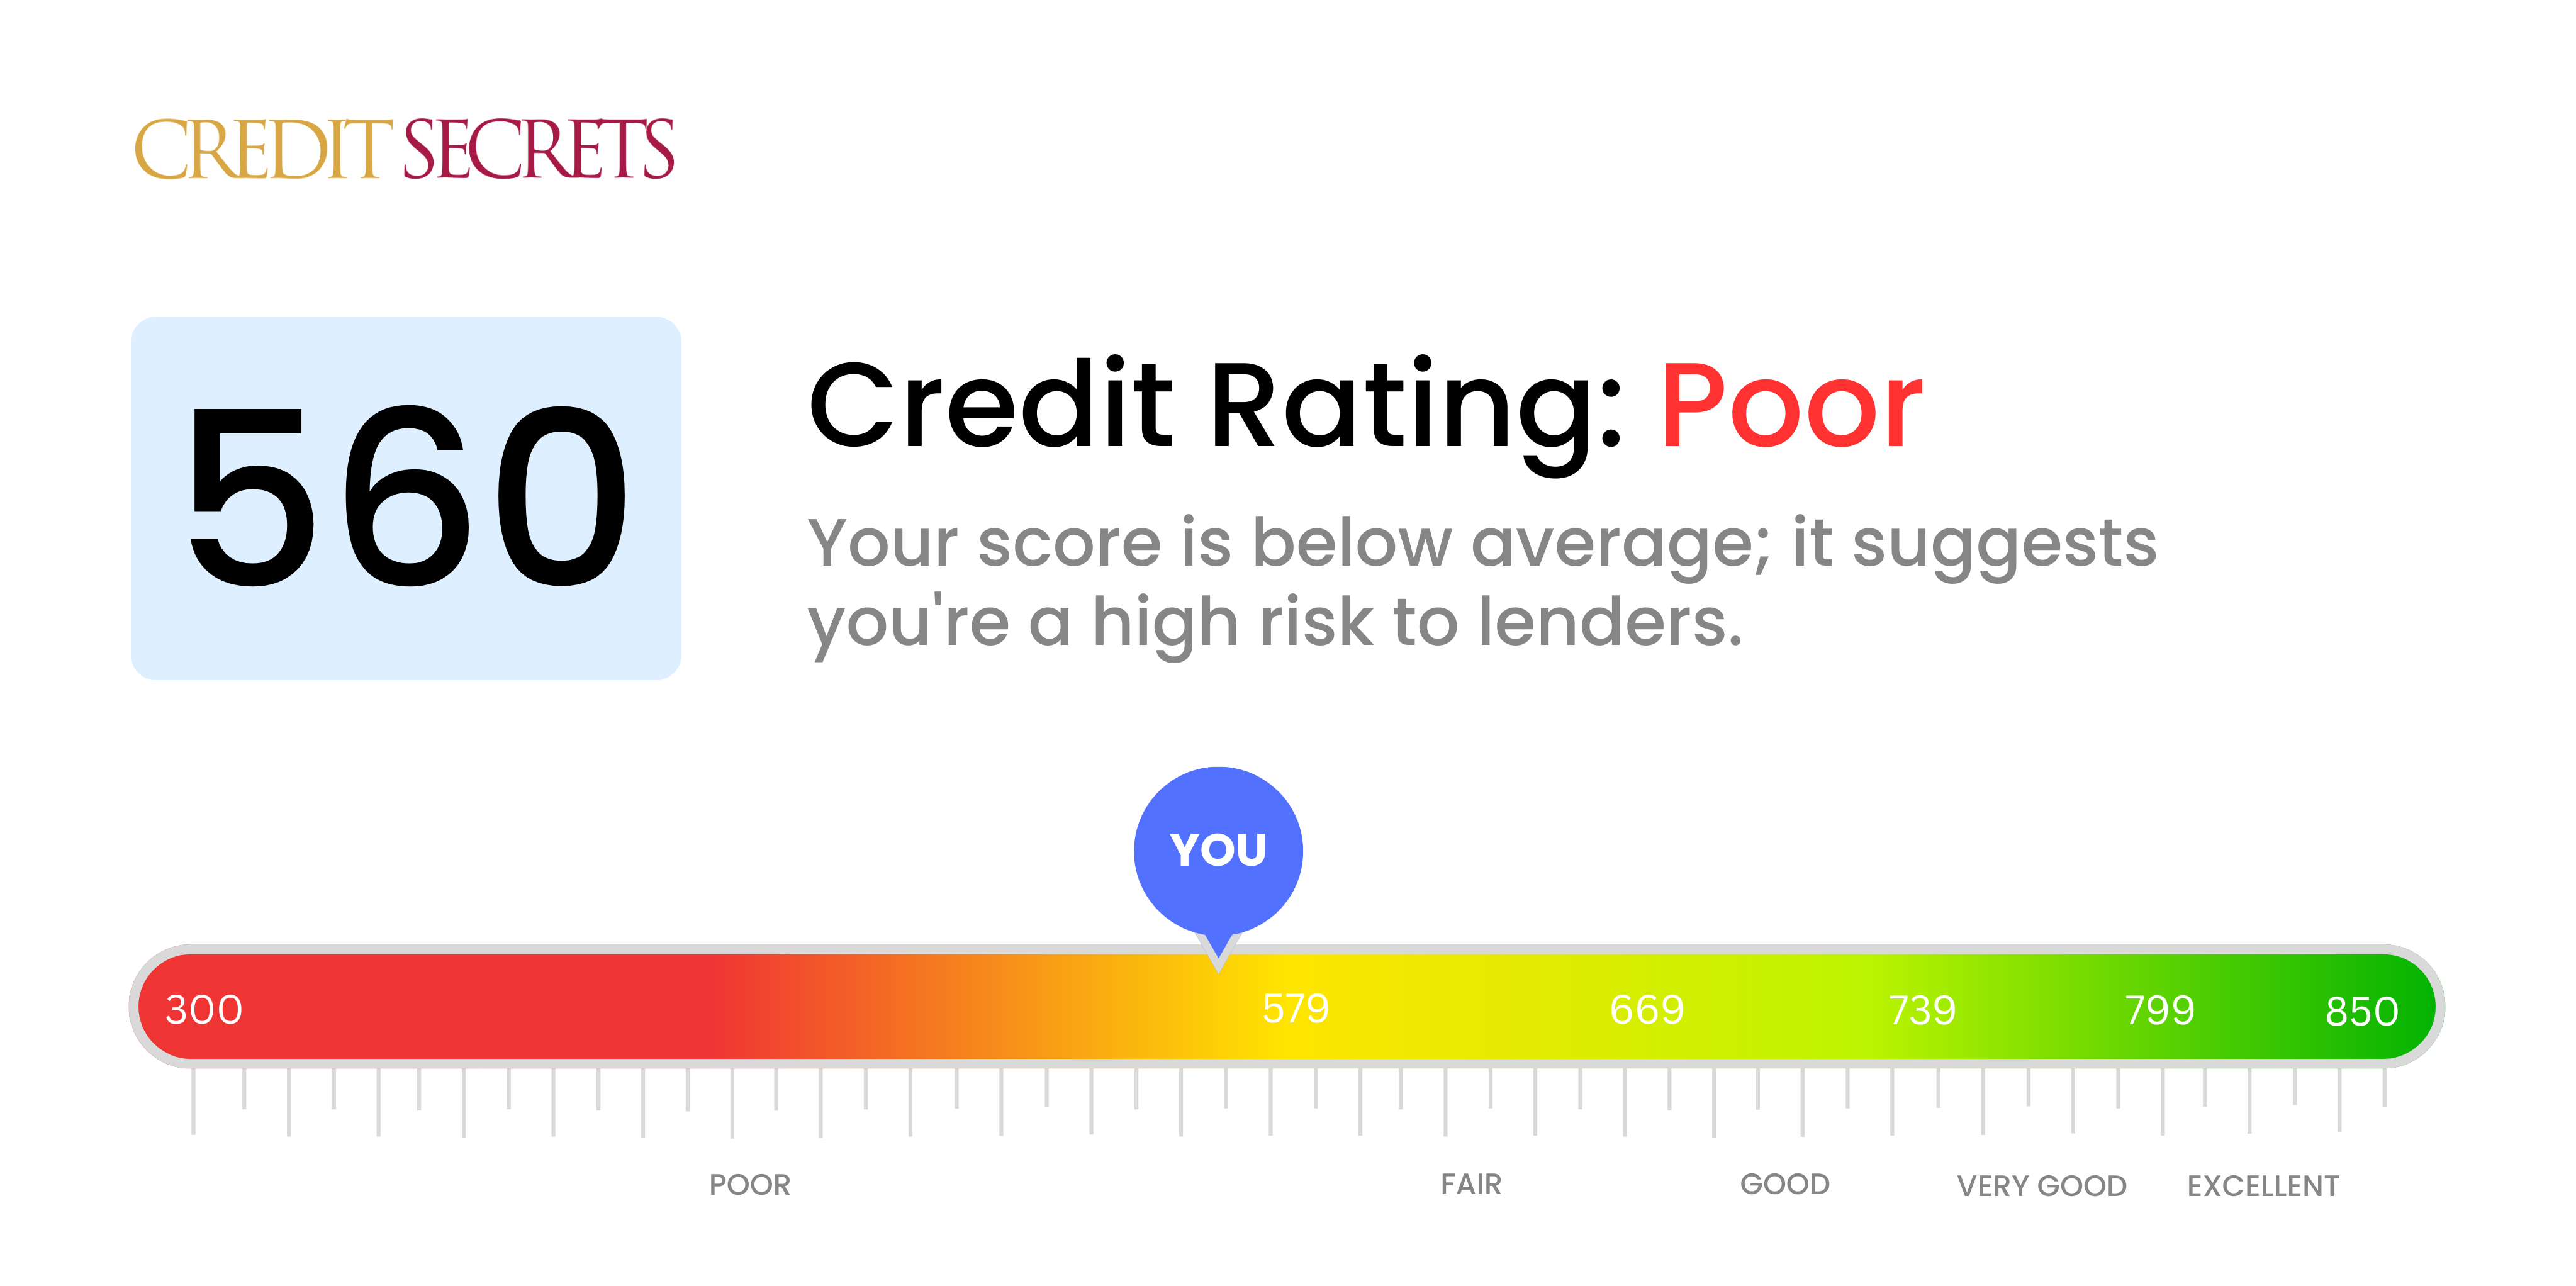 Is 560 a good credit score?